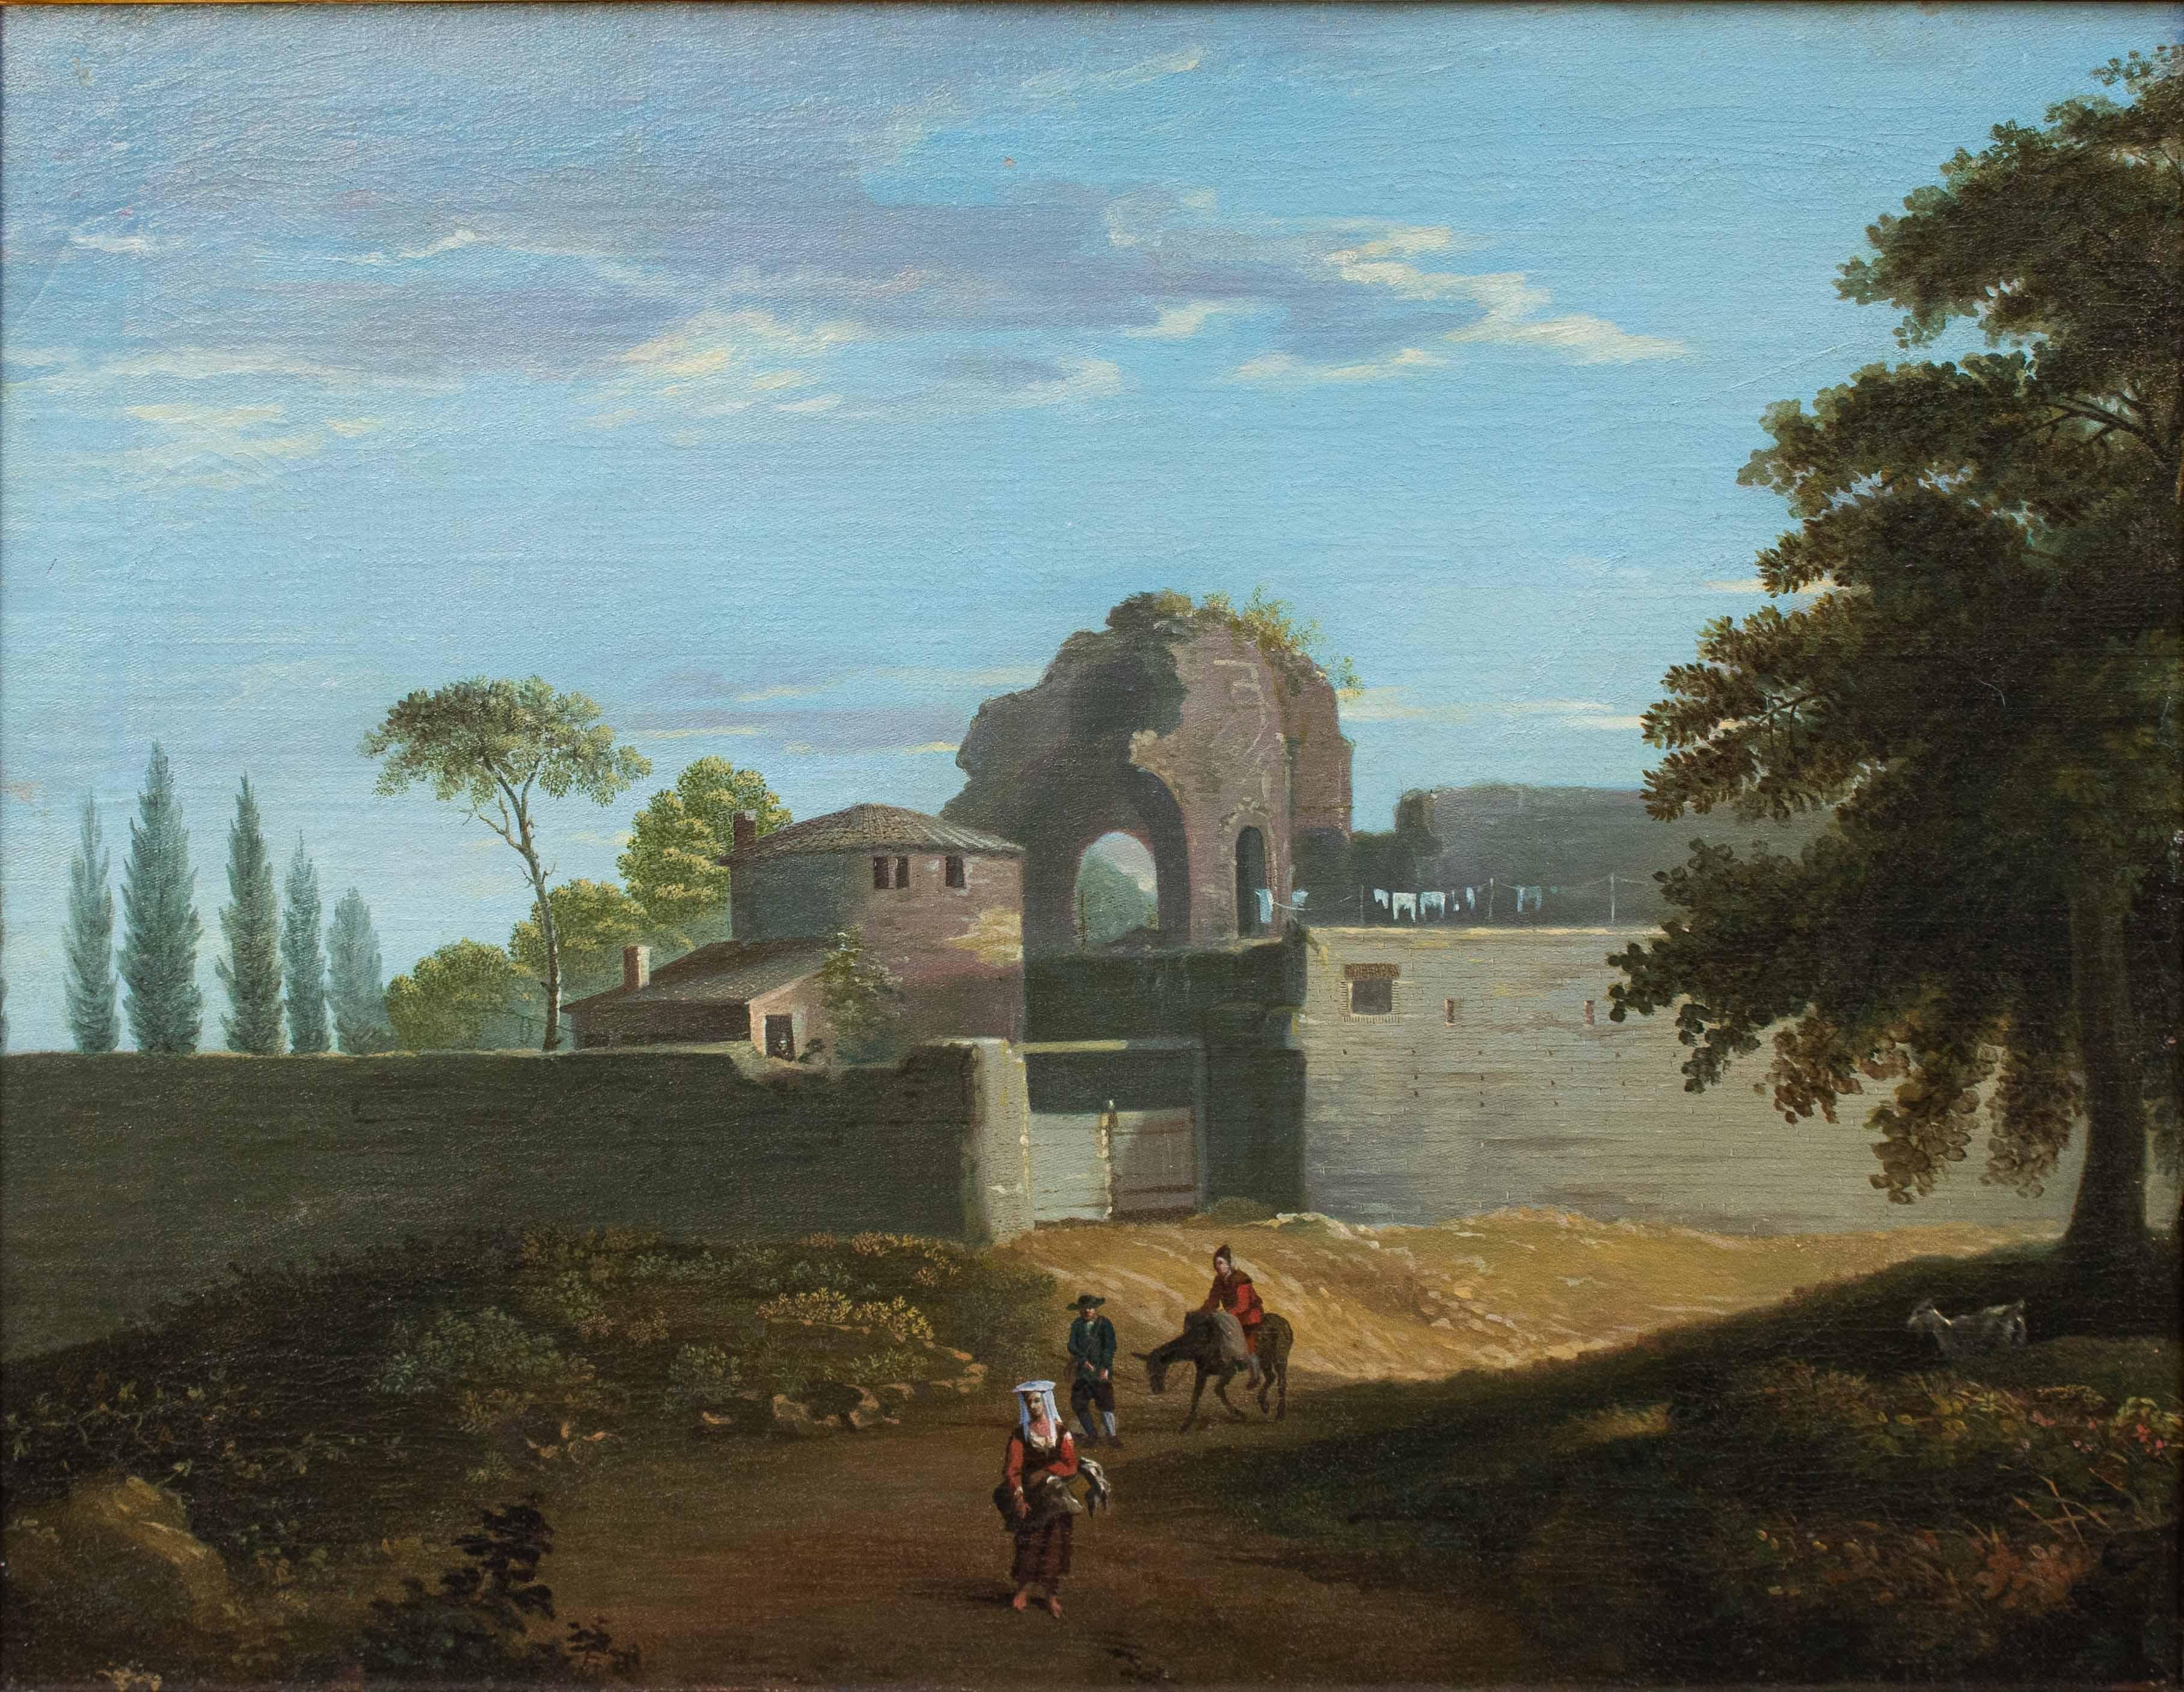 Painter active in Rome in the 18th-19th century.
View of the temple of Minerva Medica
Oil on canvas, 65 x 78 cm - with frame 71.5 x 85 cm

The painting bears a traditional attribution to François Marius Granet (Aix-en-Provence, 1775 - 1849). The